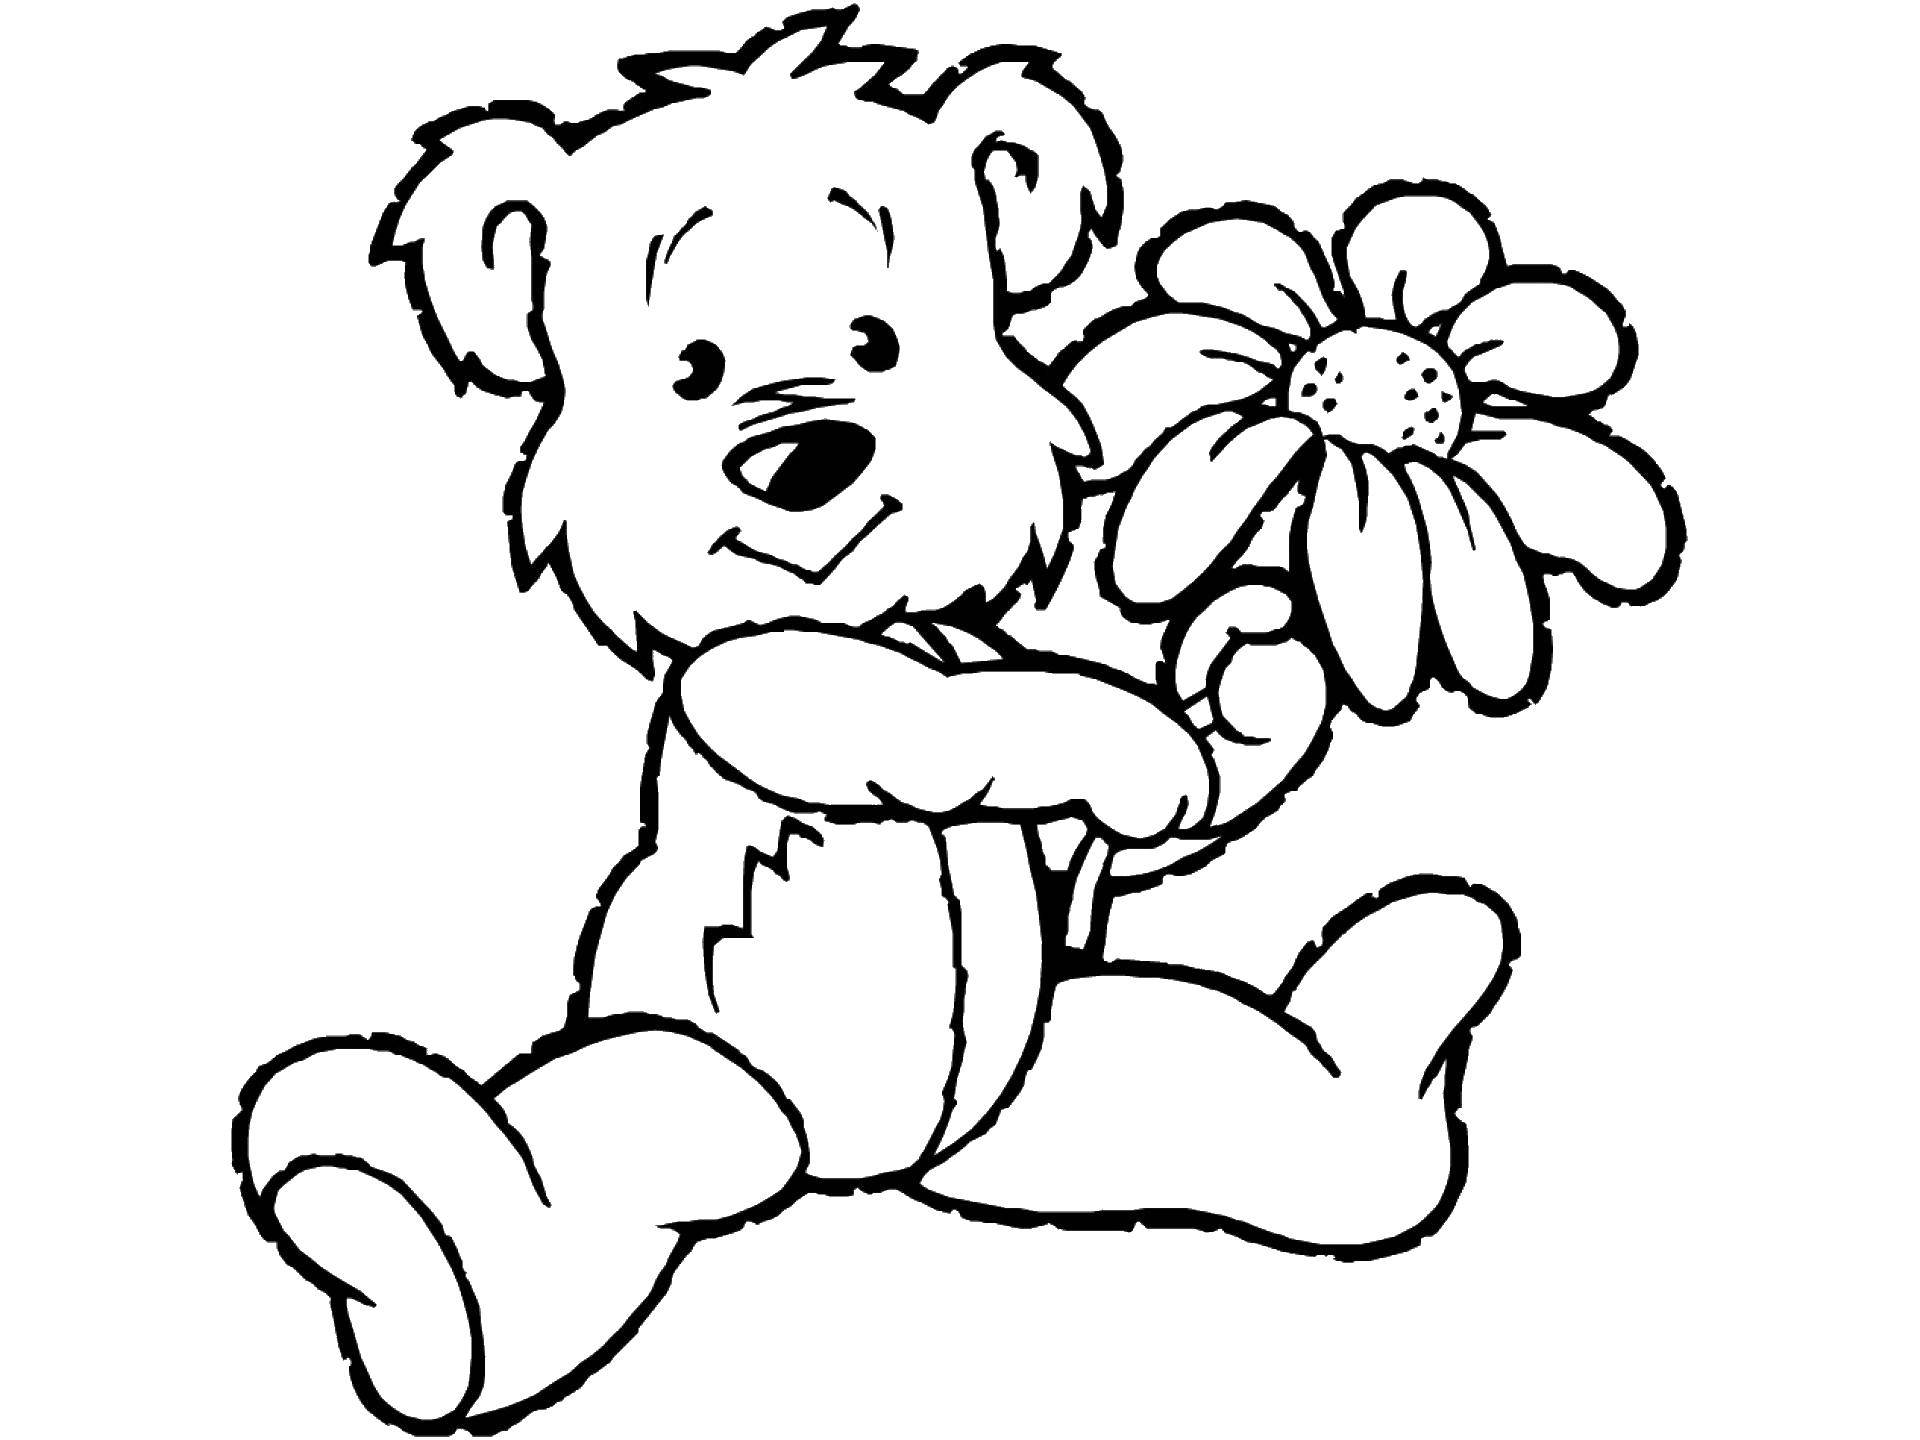 Coloring Toy bear. Category cartoons. Tags:  Toy, bear.